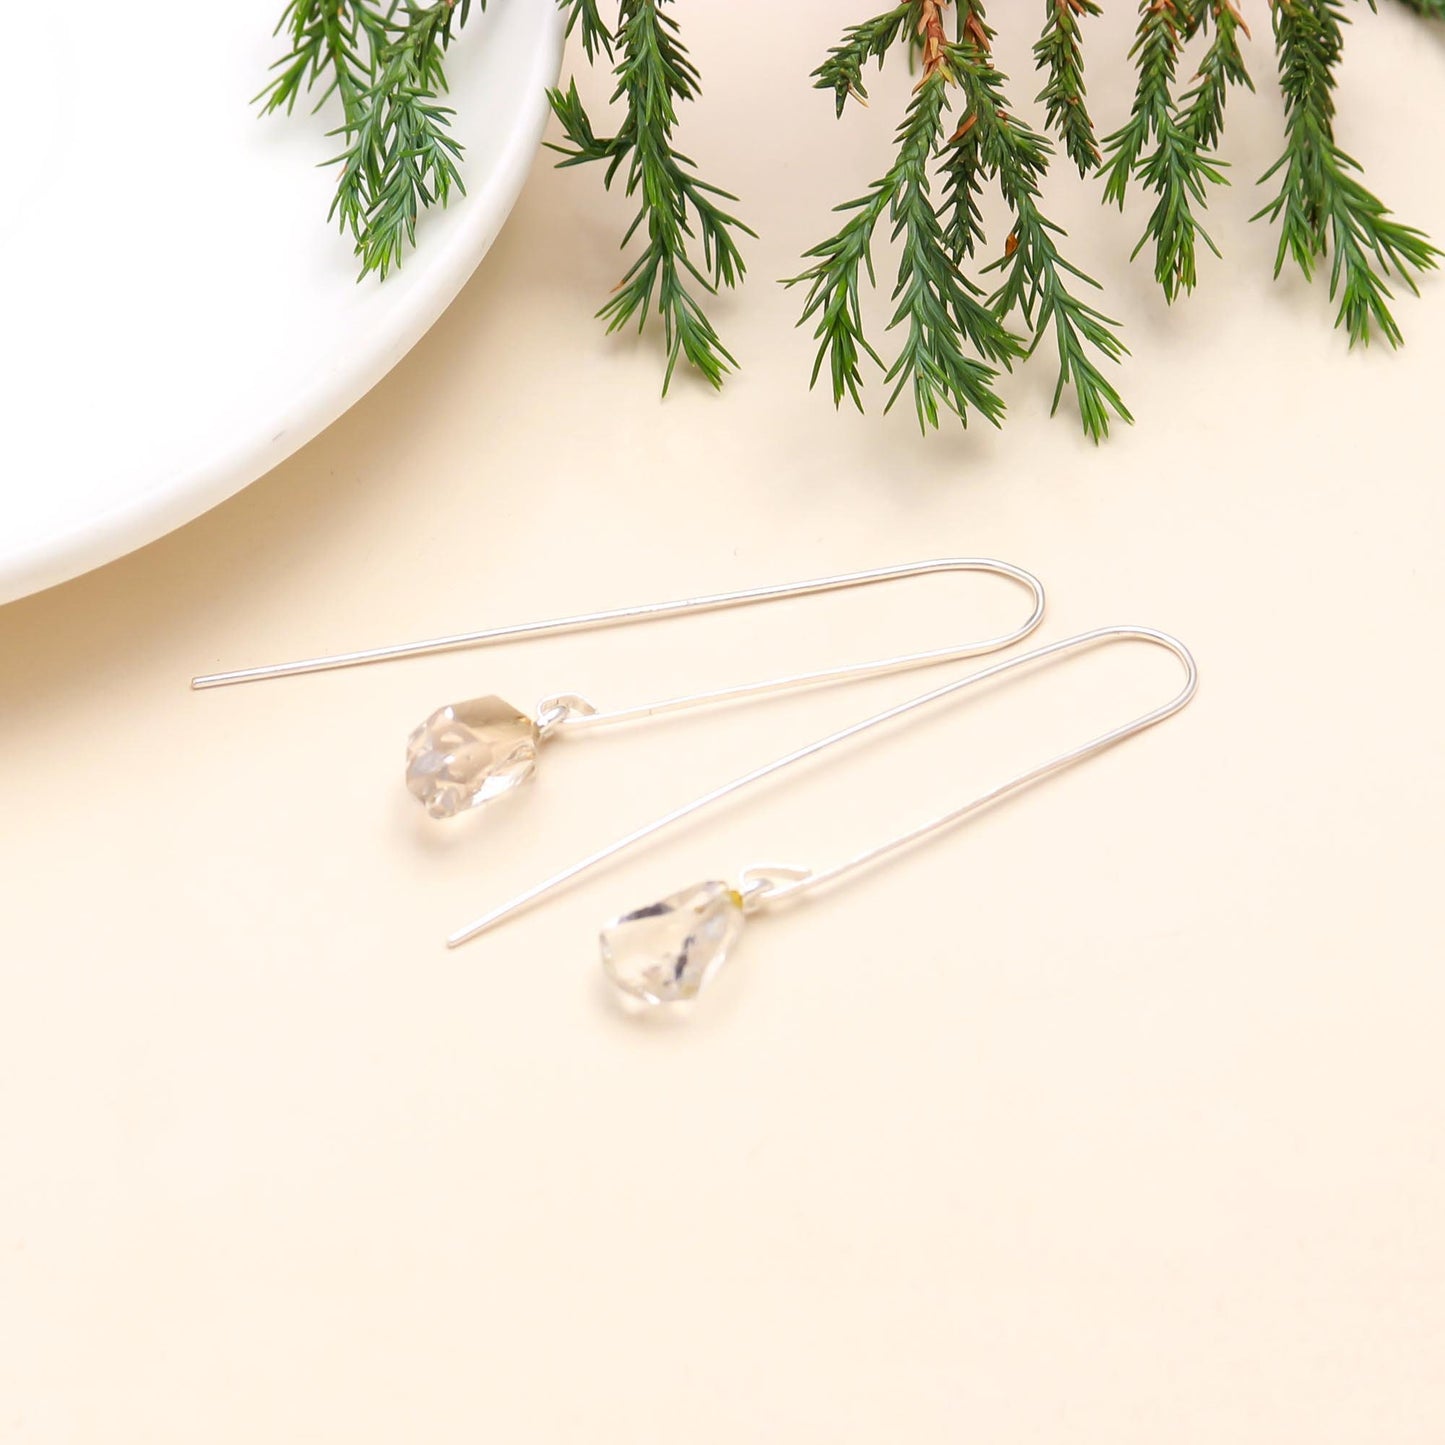 Solid 925 Sterling Silver Herkimer Diamond Long Earrings. Gift for her /Birthday, Anniversary, April Birth Stone, Silver & Gold Finish